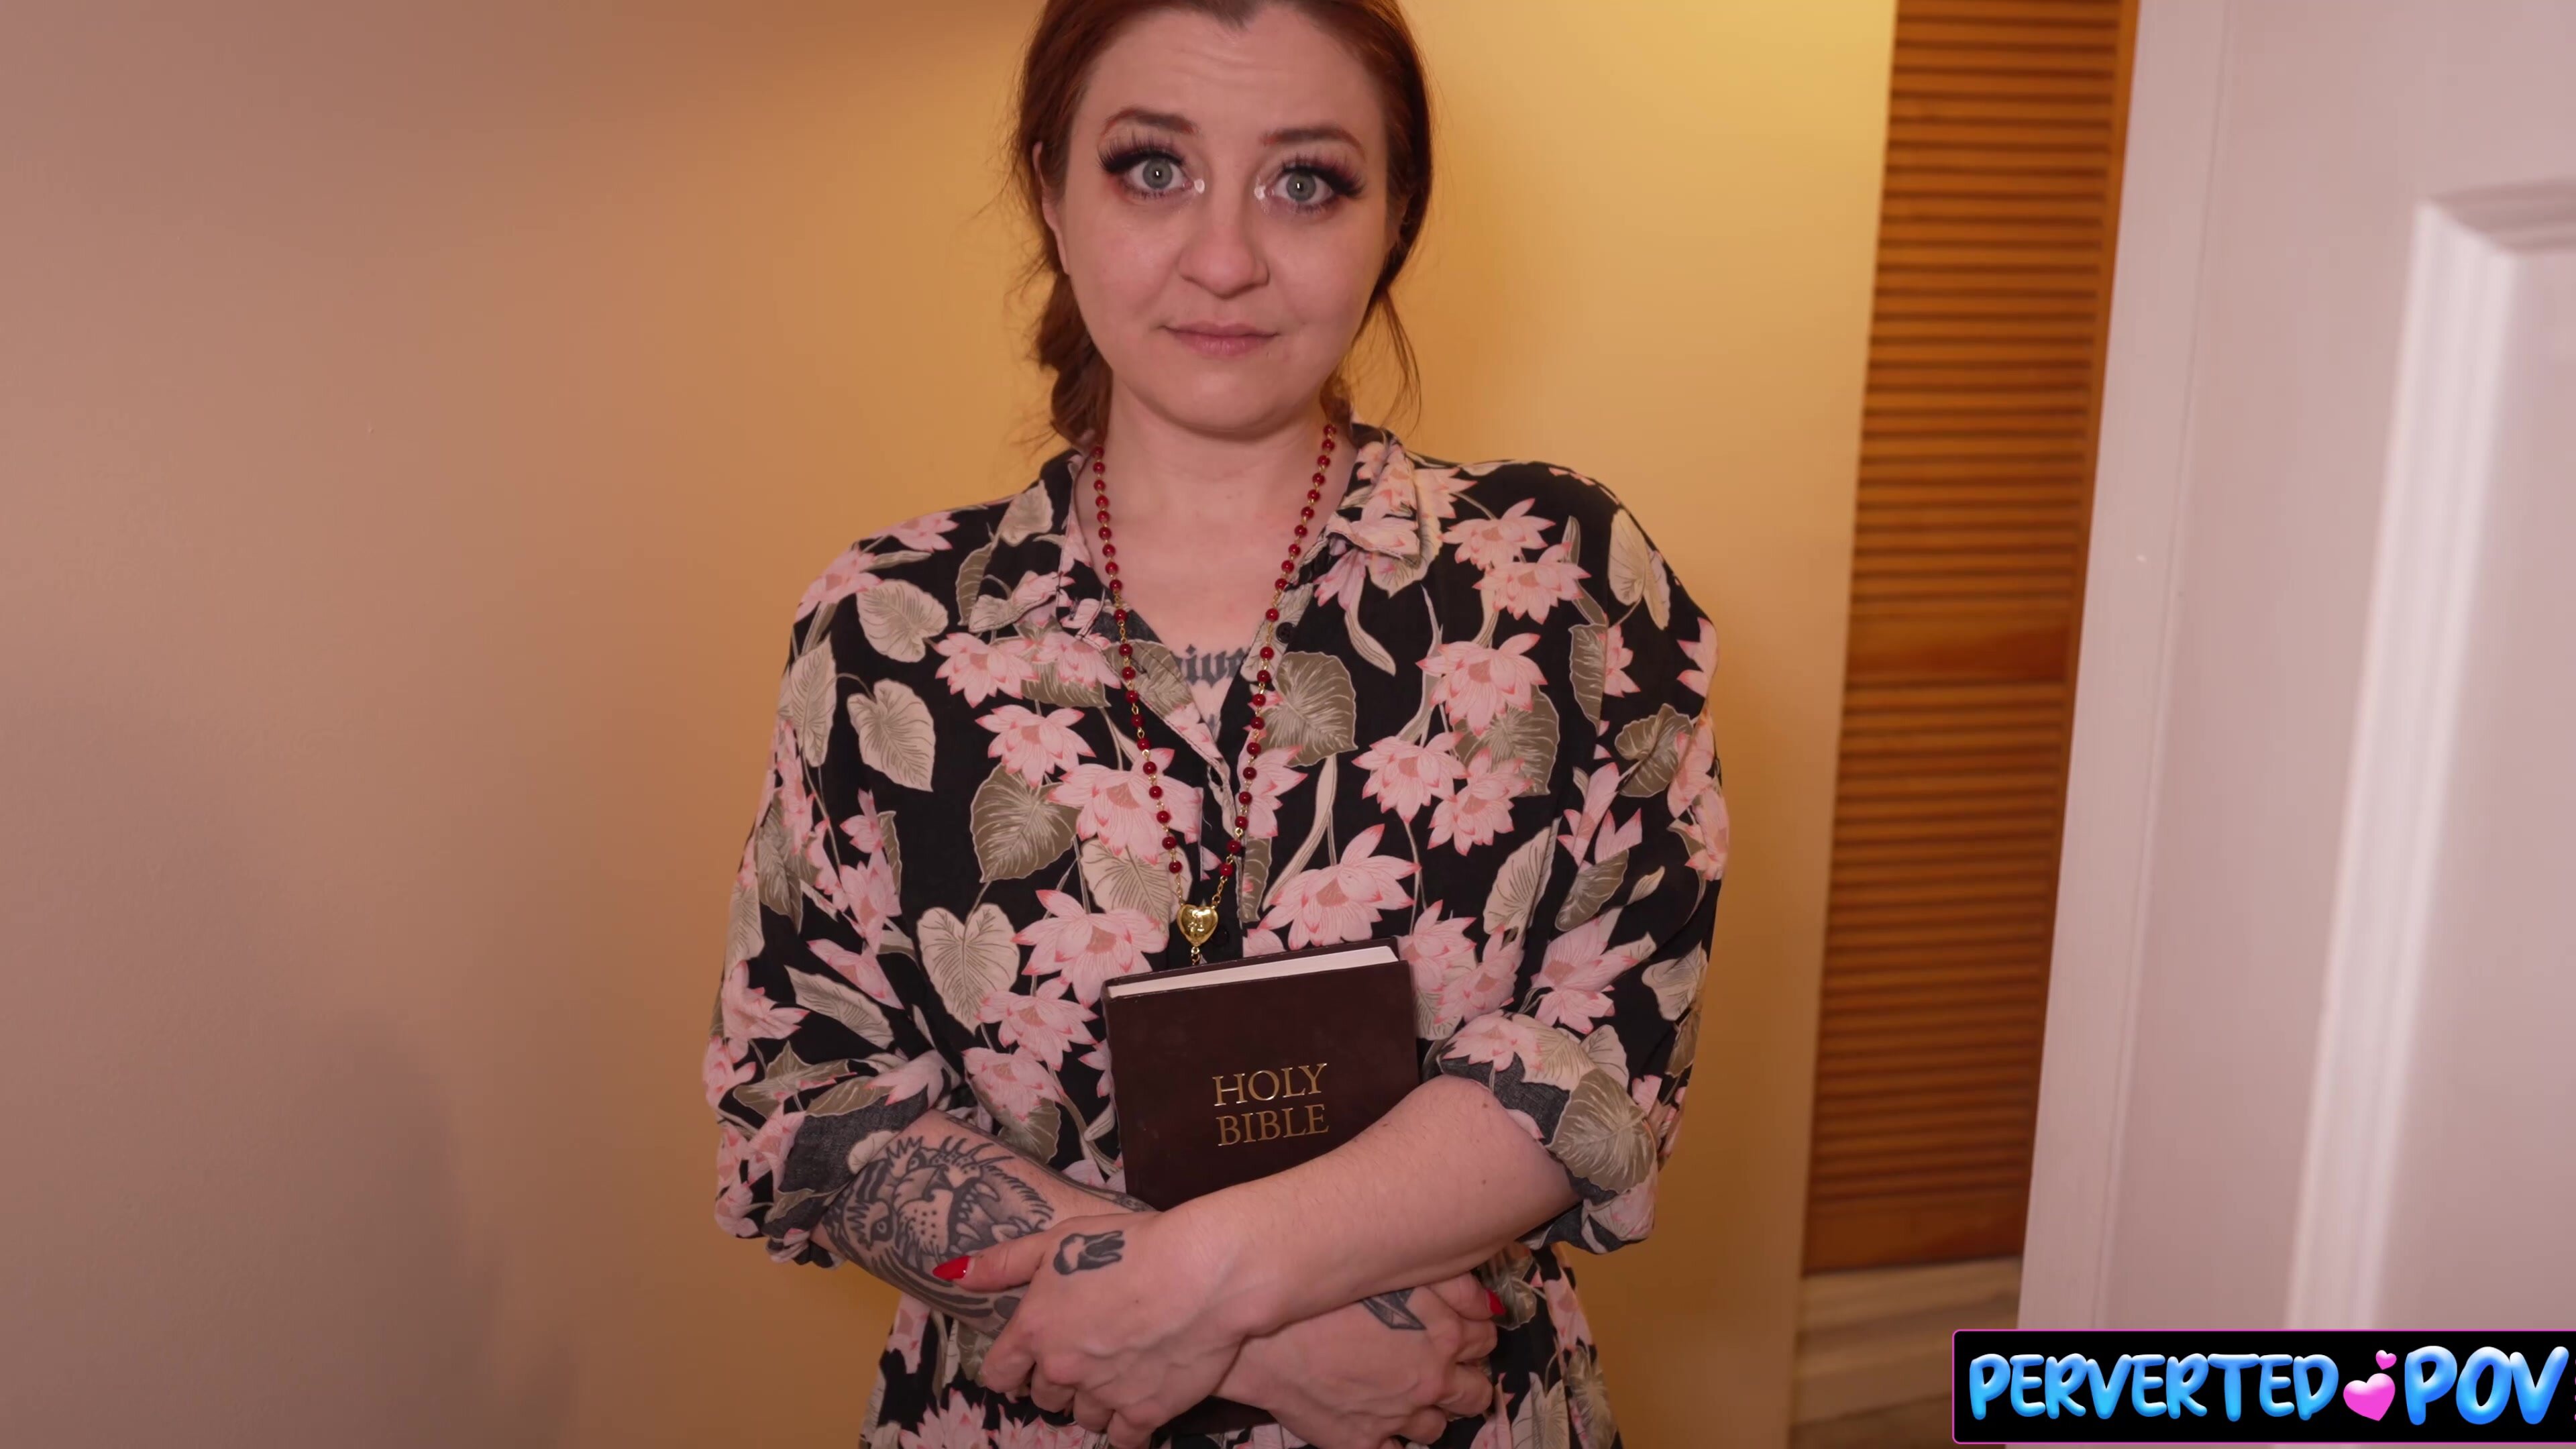 Freshie Juice - The Pastors daughter comes over for Bible study